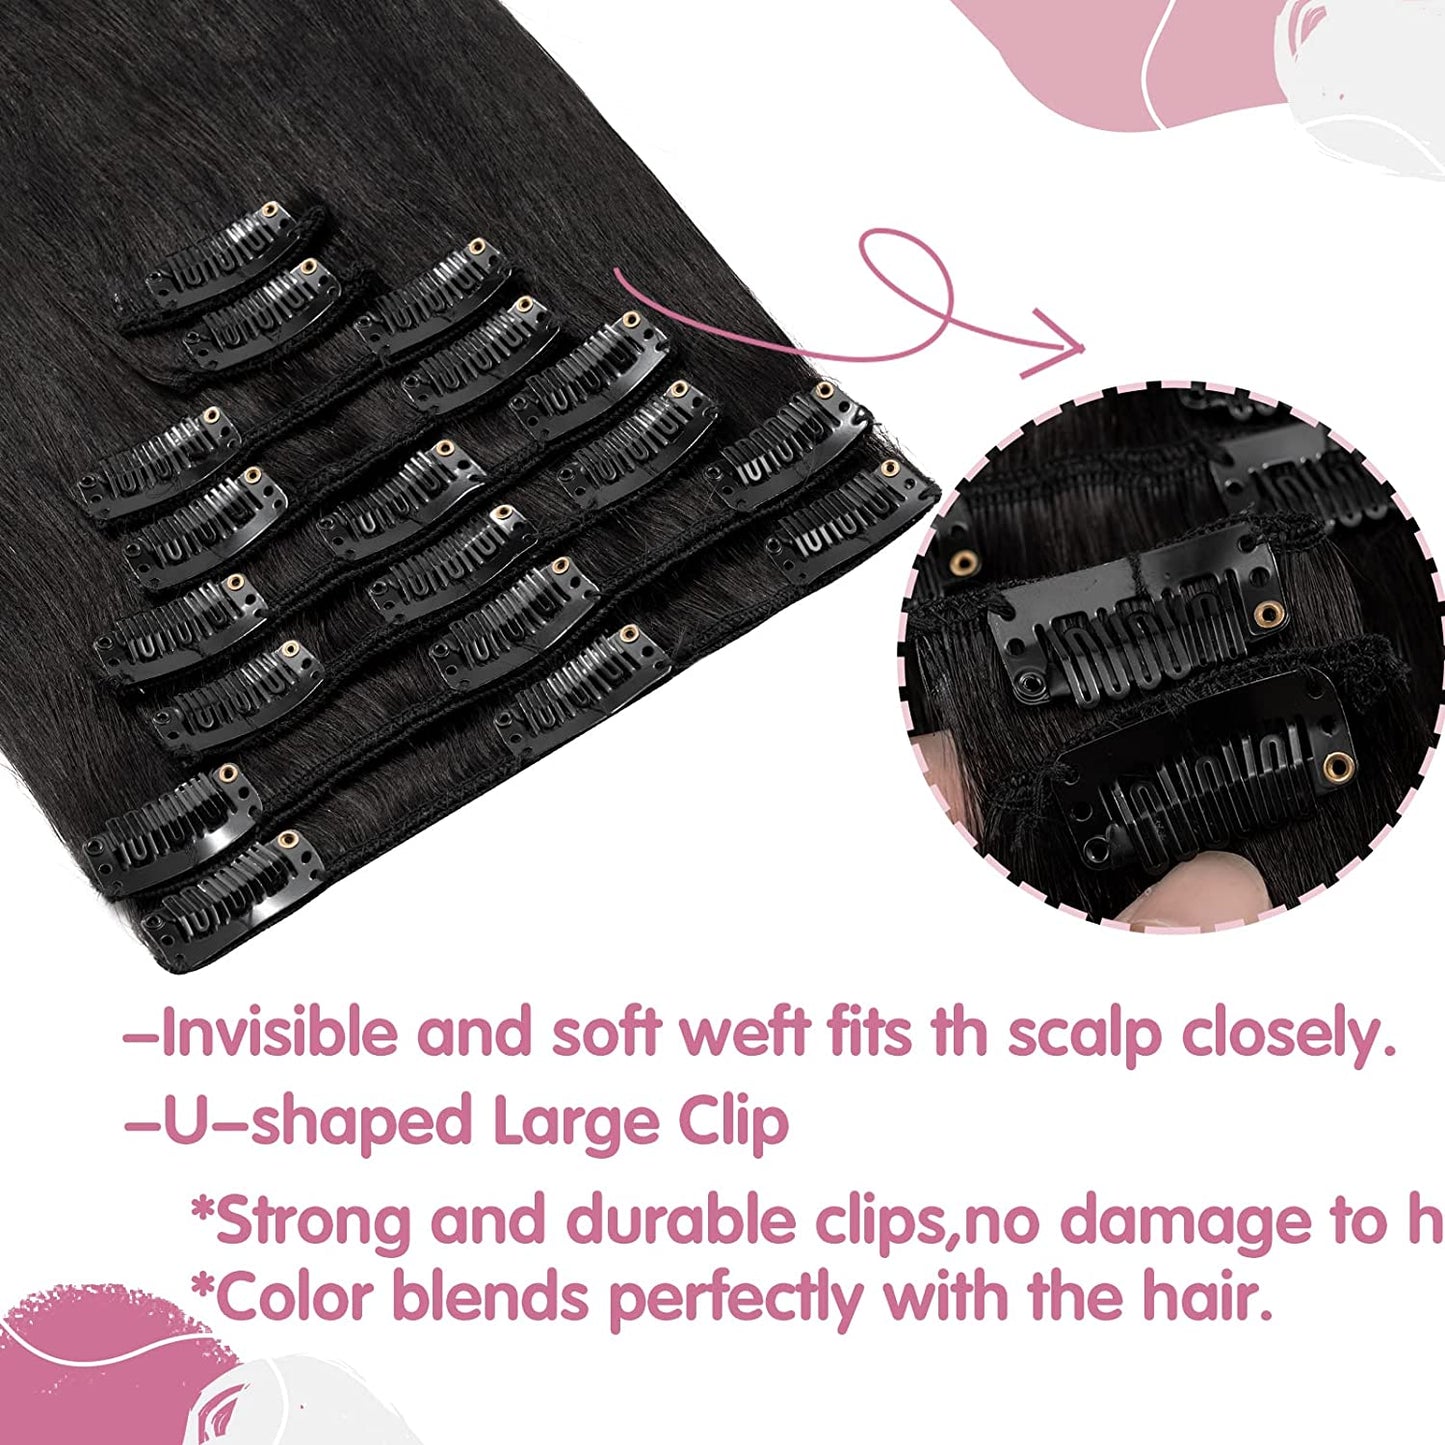 SEGO Clip in Hair Extensions Human Hair 8PCS 18-24inch